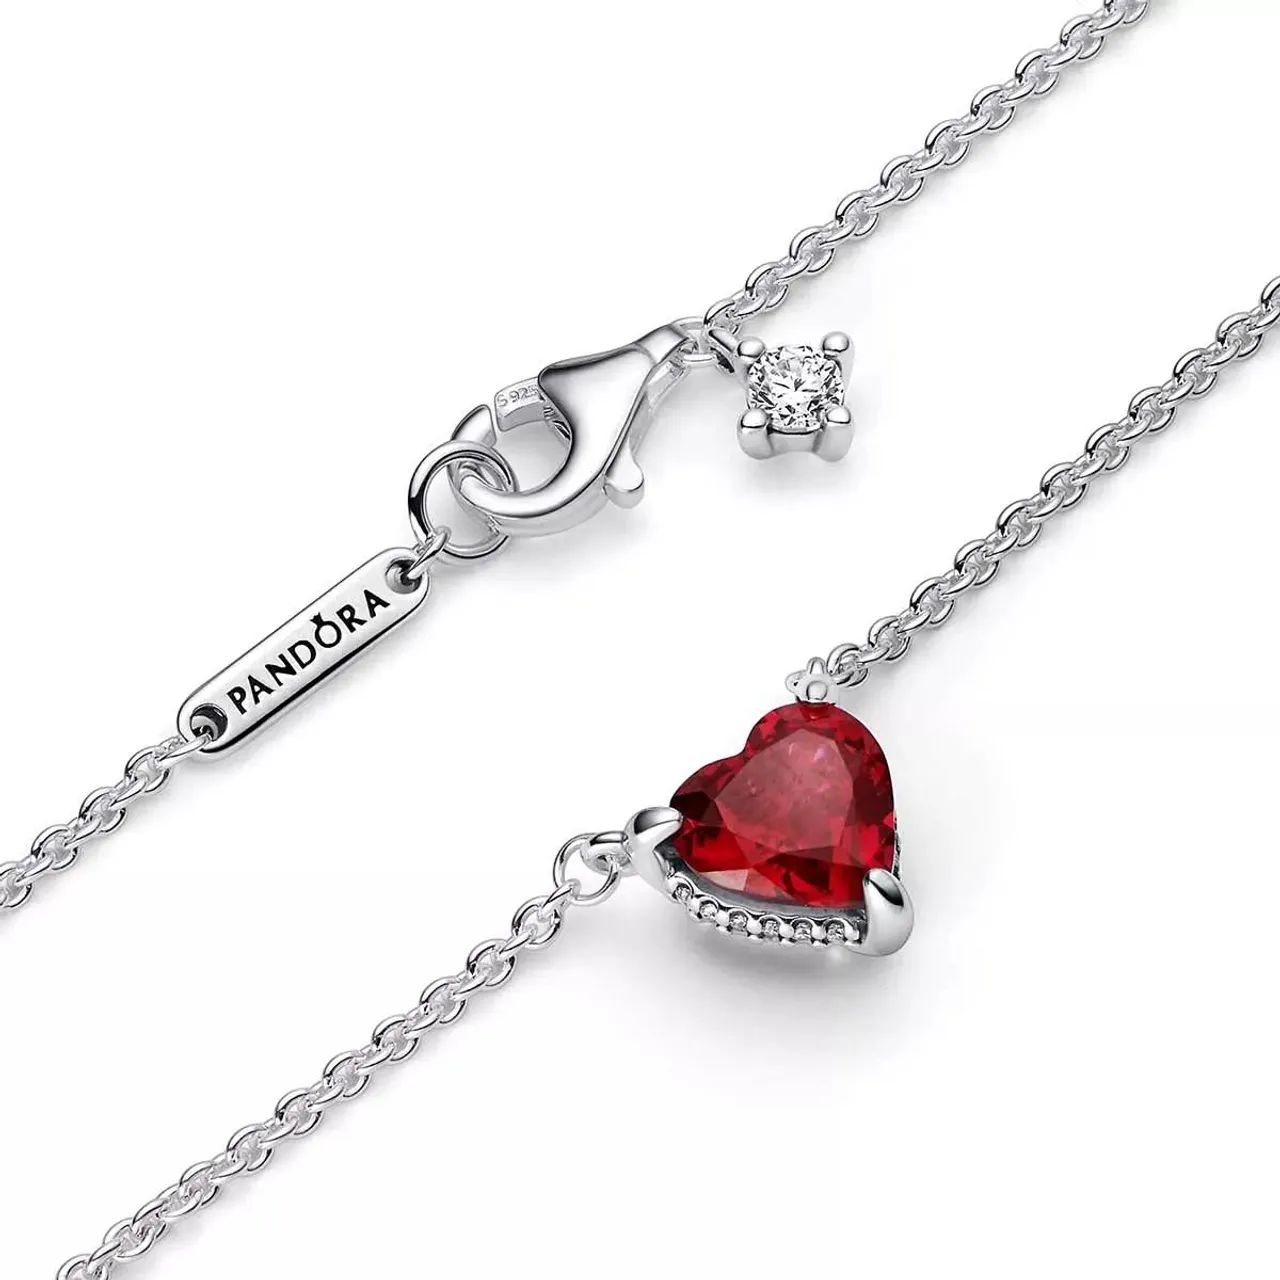 Pandora Necklaces - Heart sterling silver collier with cherries jubile - red - Necklaces for ladies